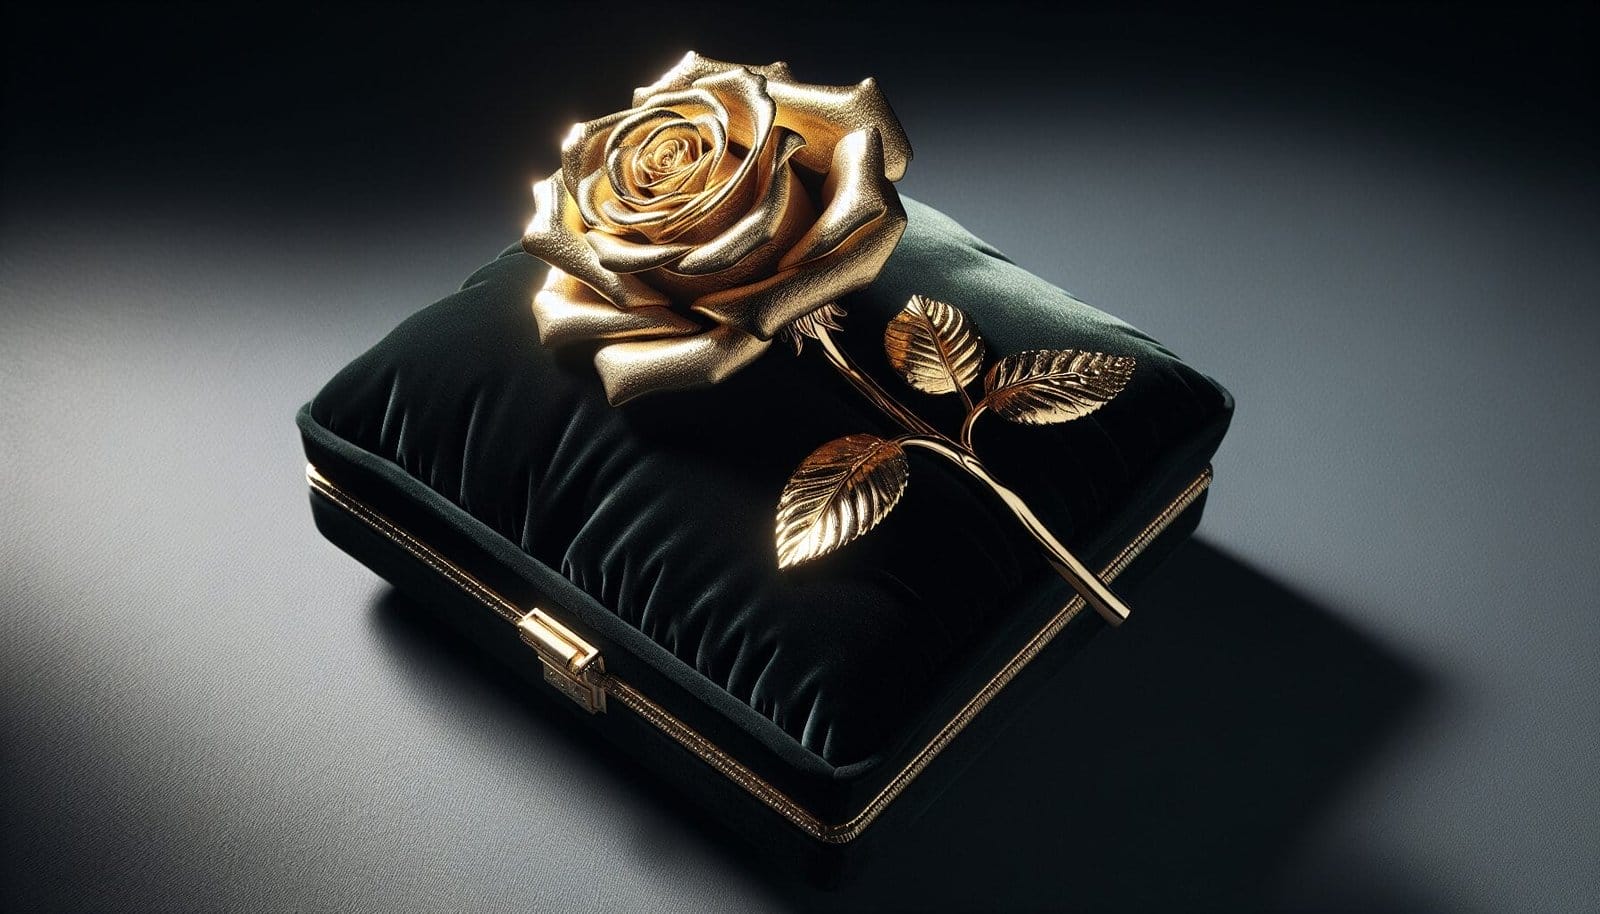 Read more about the article Luxurious 24k Gold Rose: The Perfect Gift for Your Employee